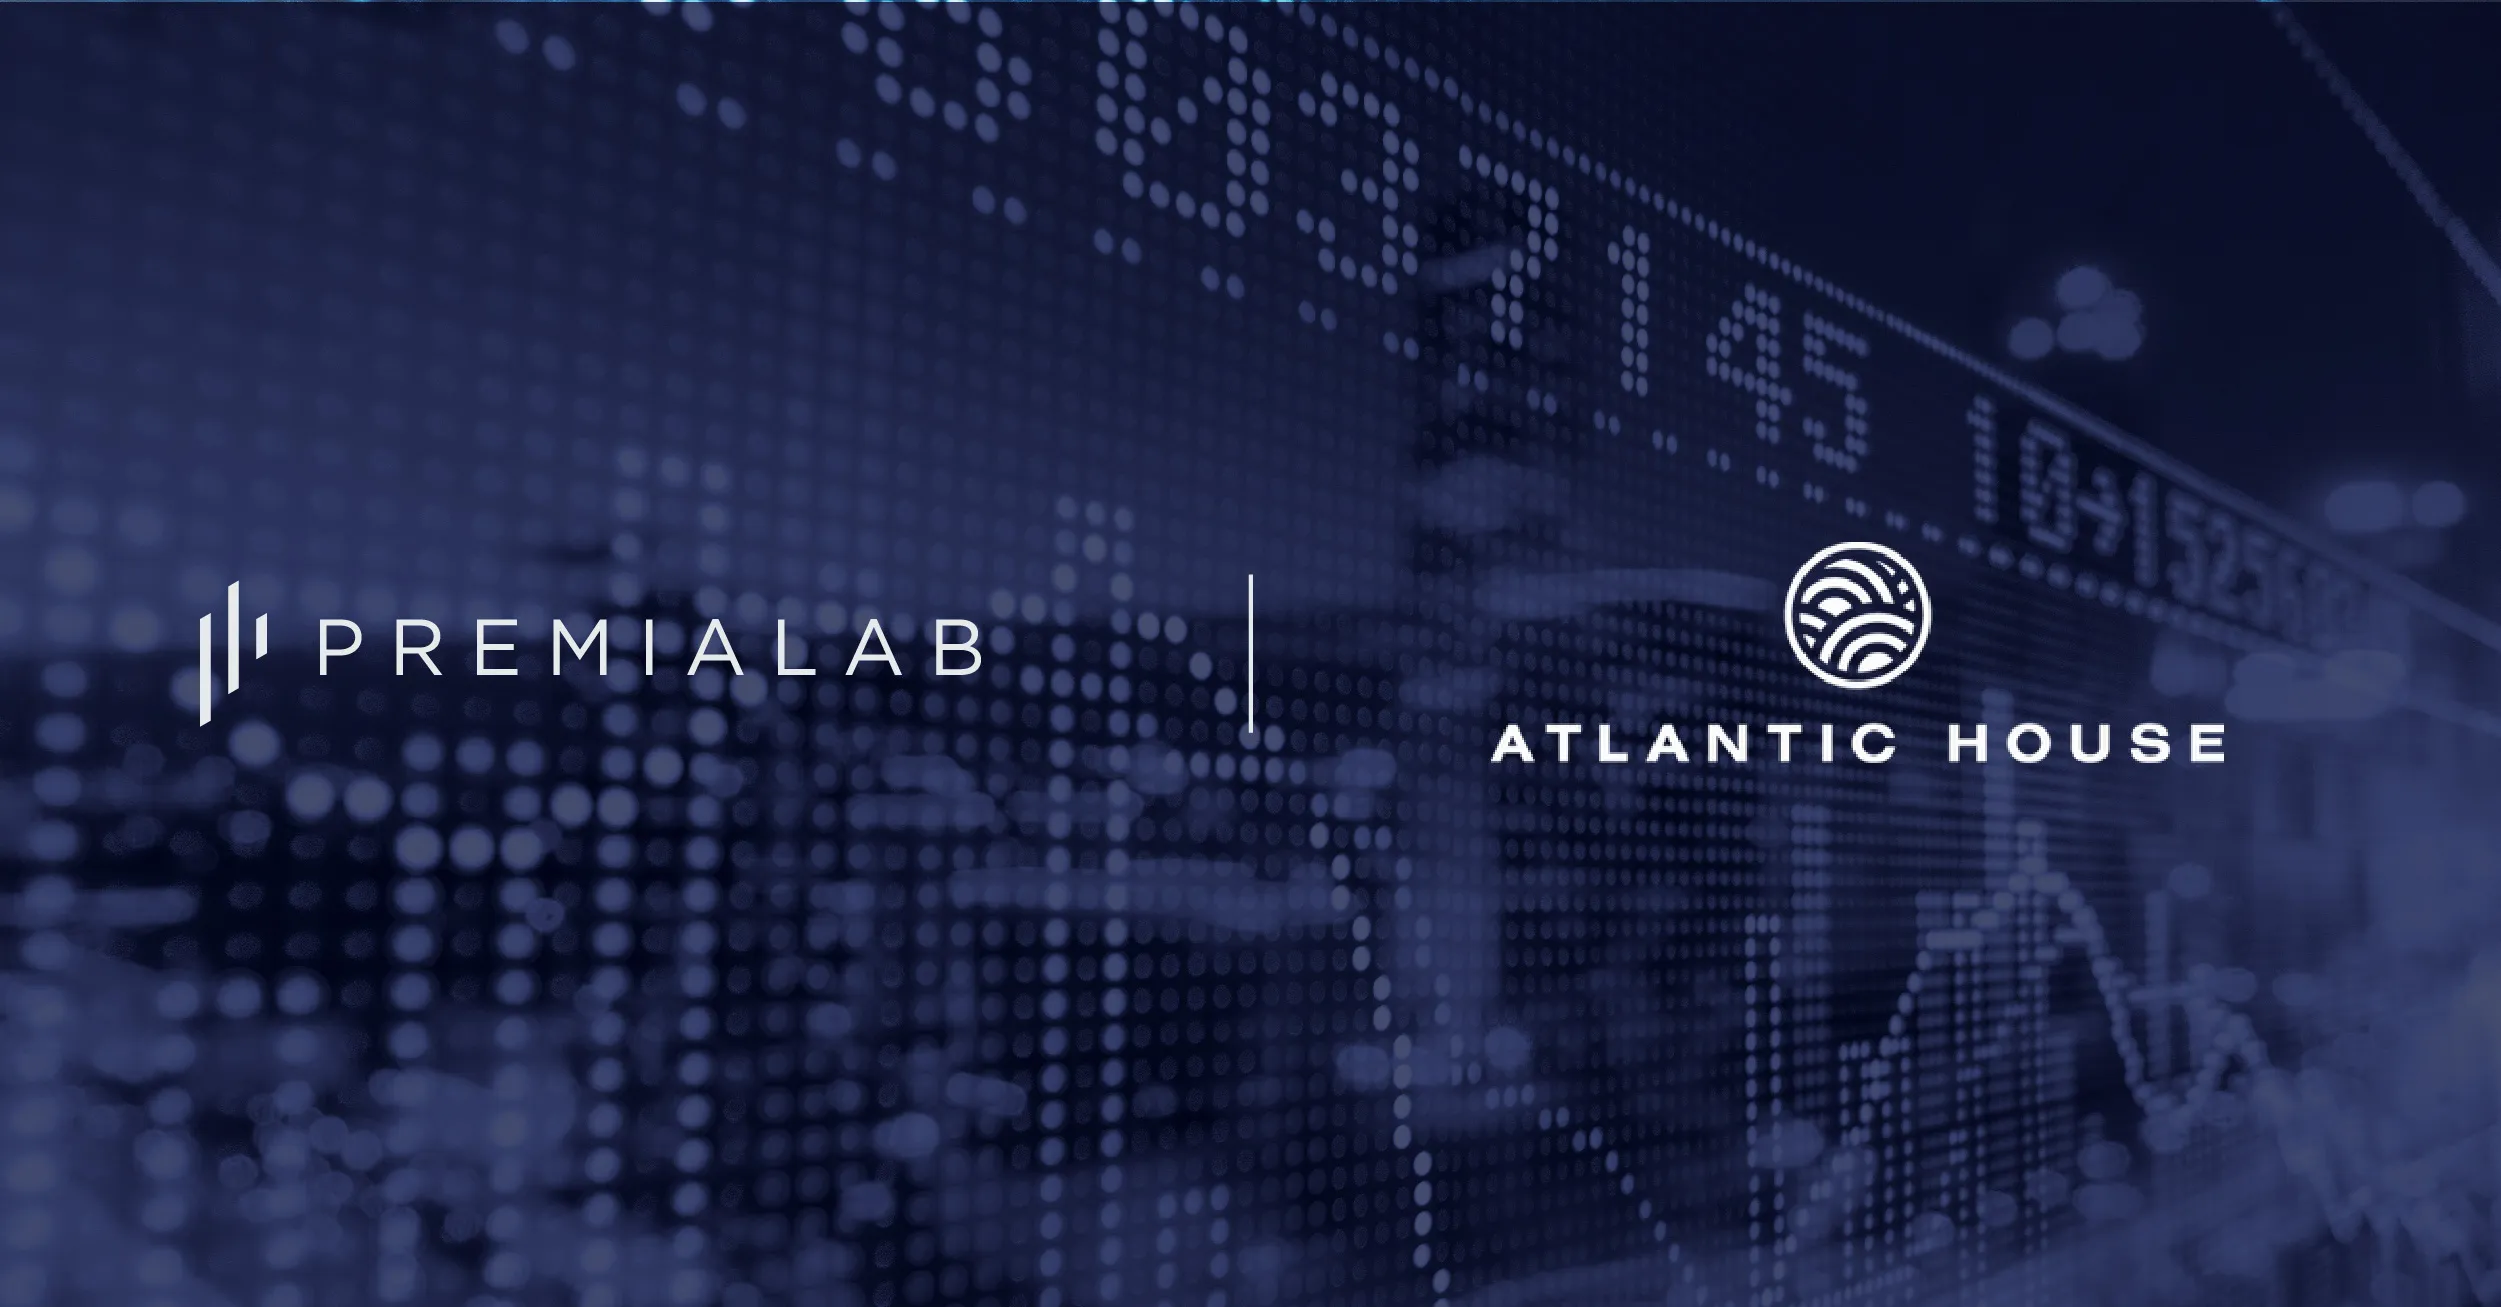 Atlantic House Investments partners with Premialab